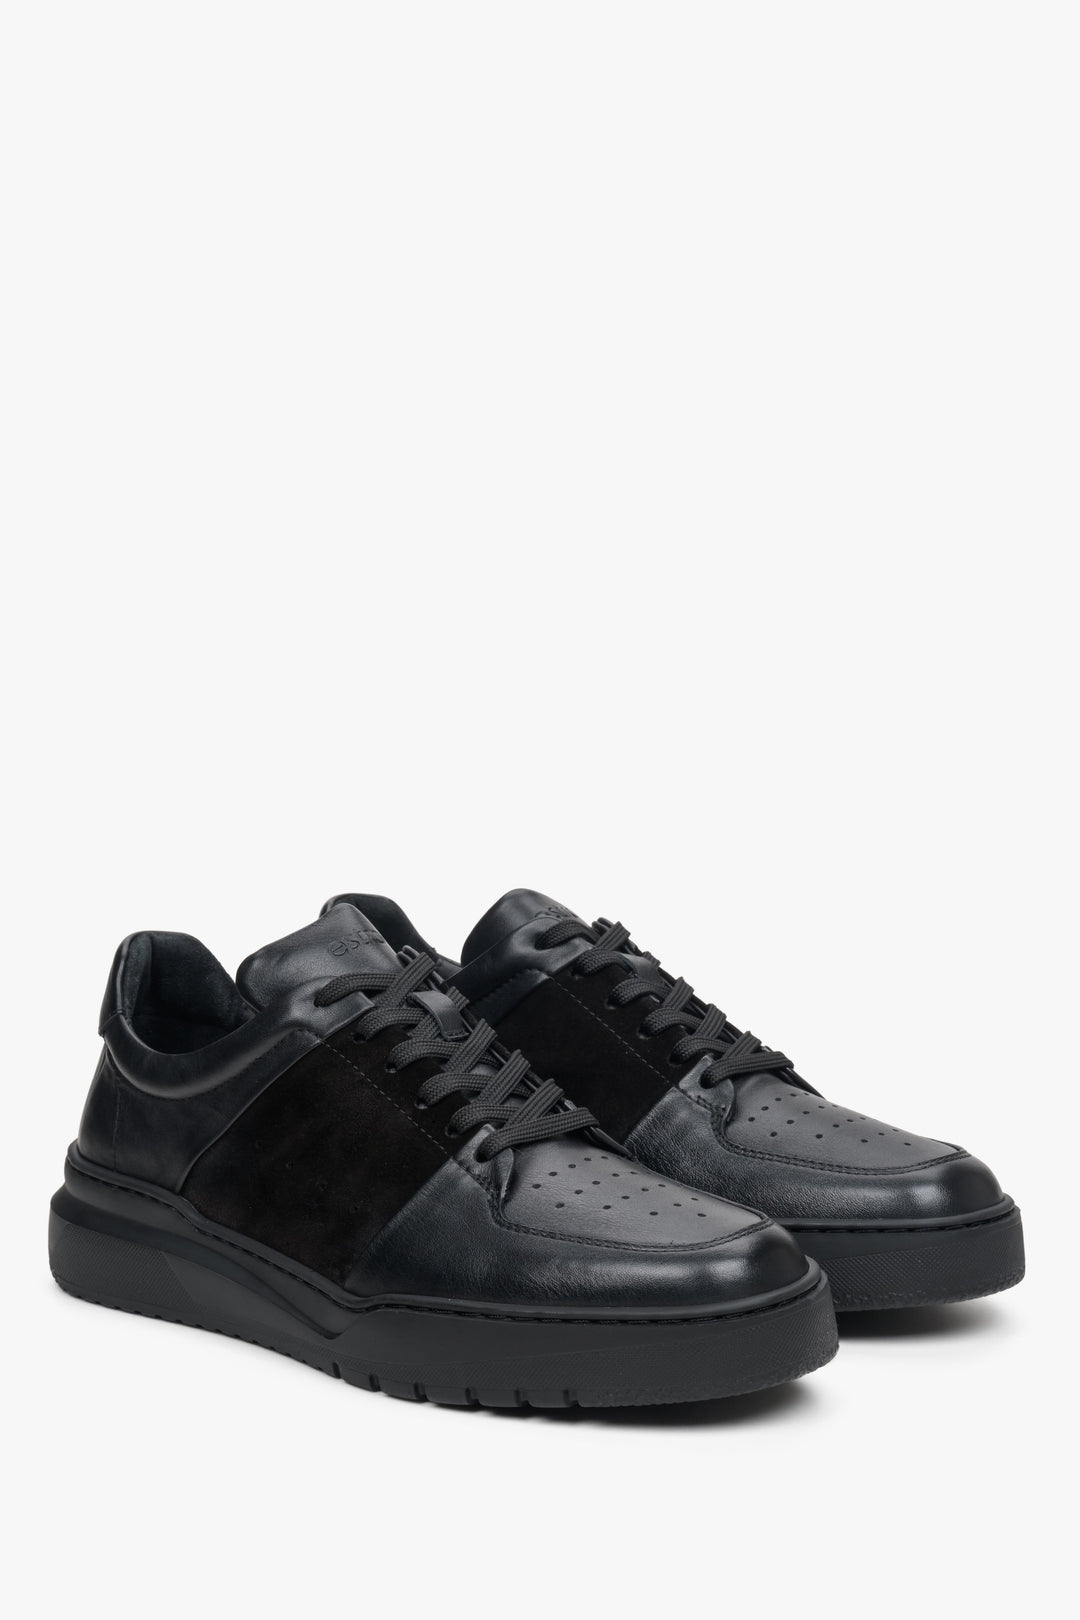 Men's black low top sneakers in leather and velvet by Estro.